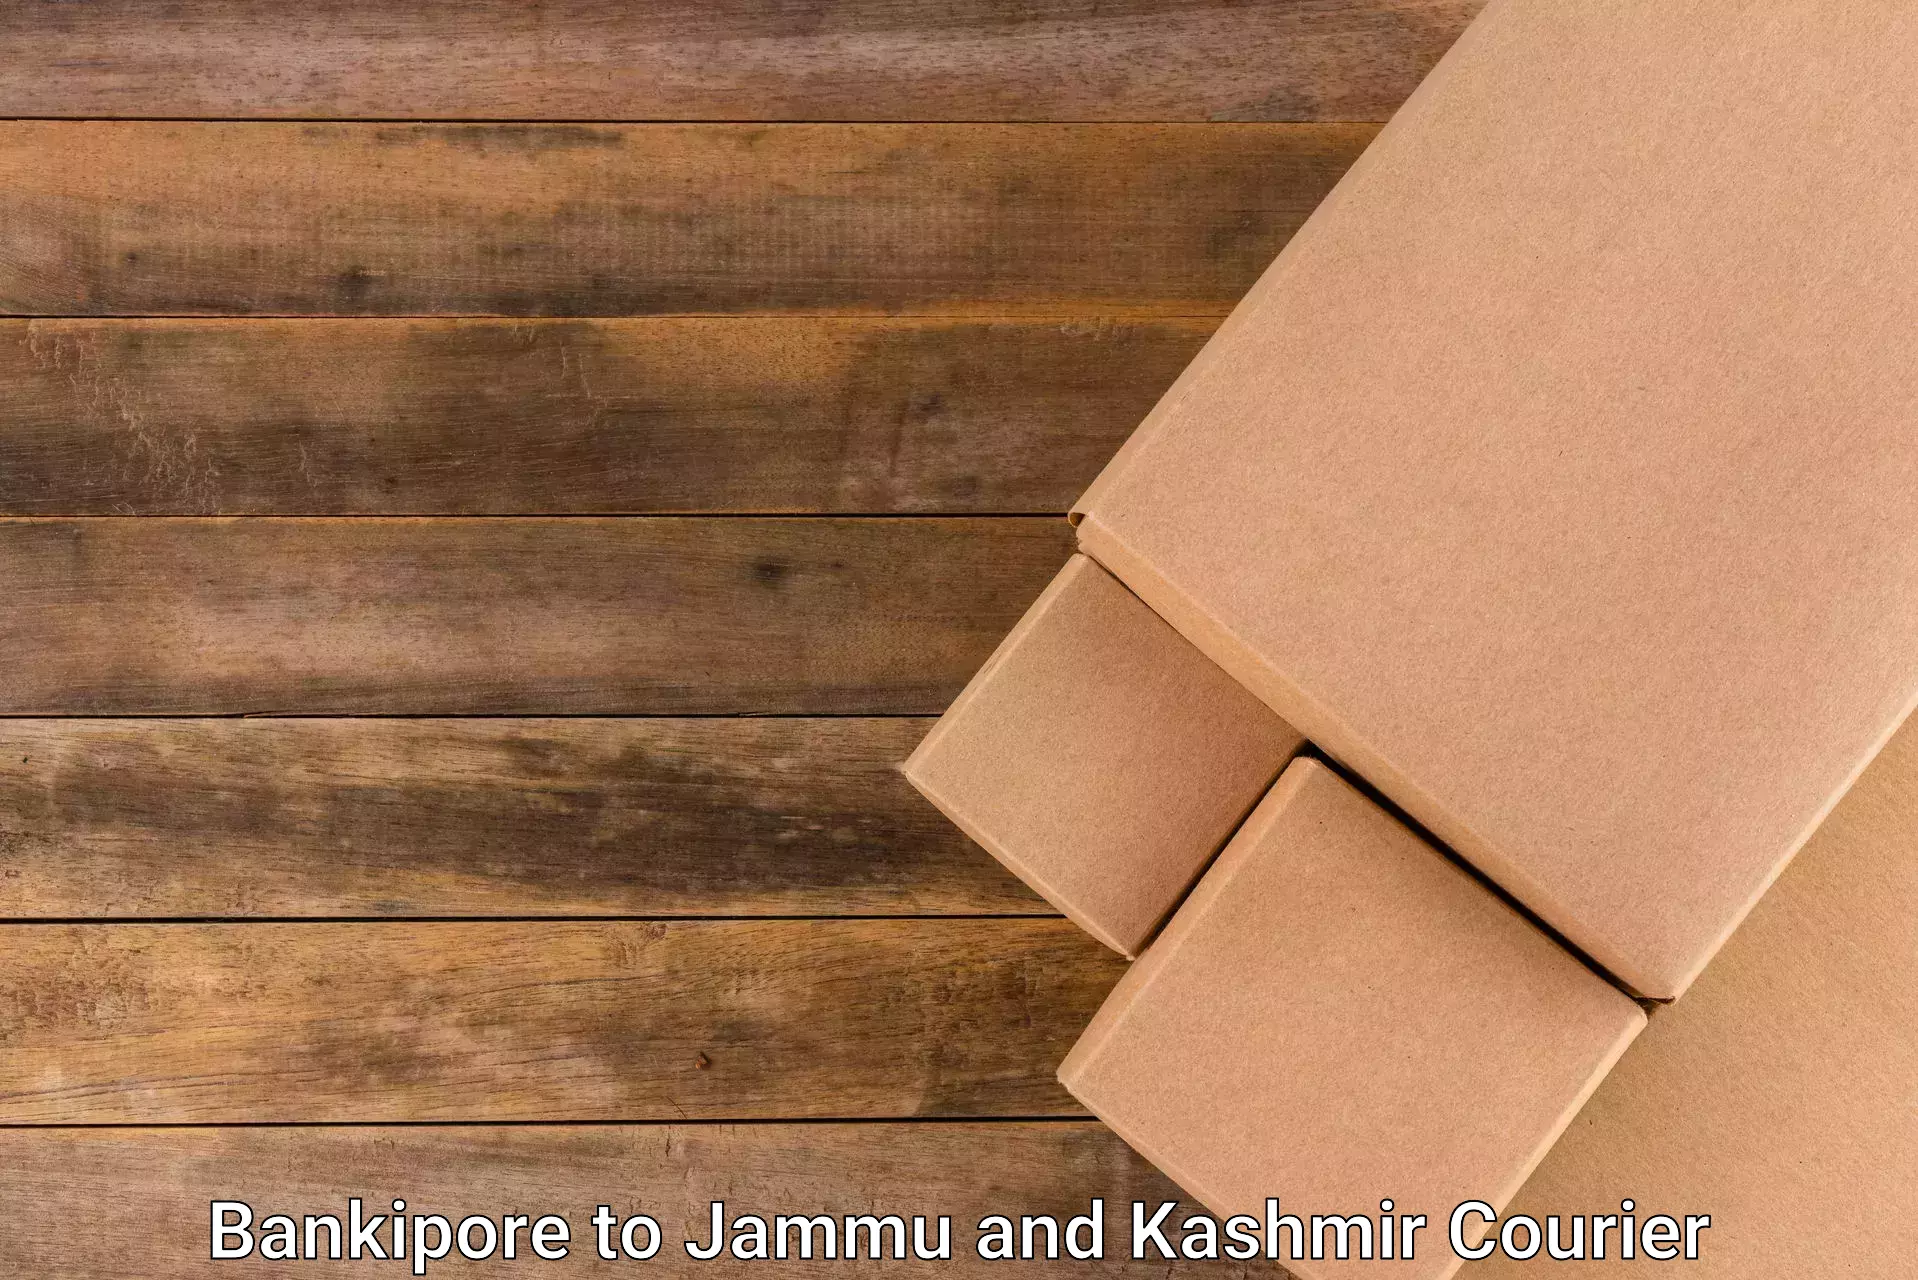 State-of-the-art courier technology Bankipore to Rajouri